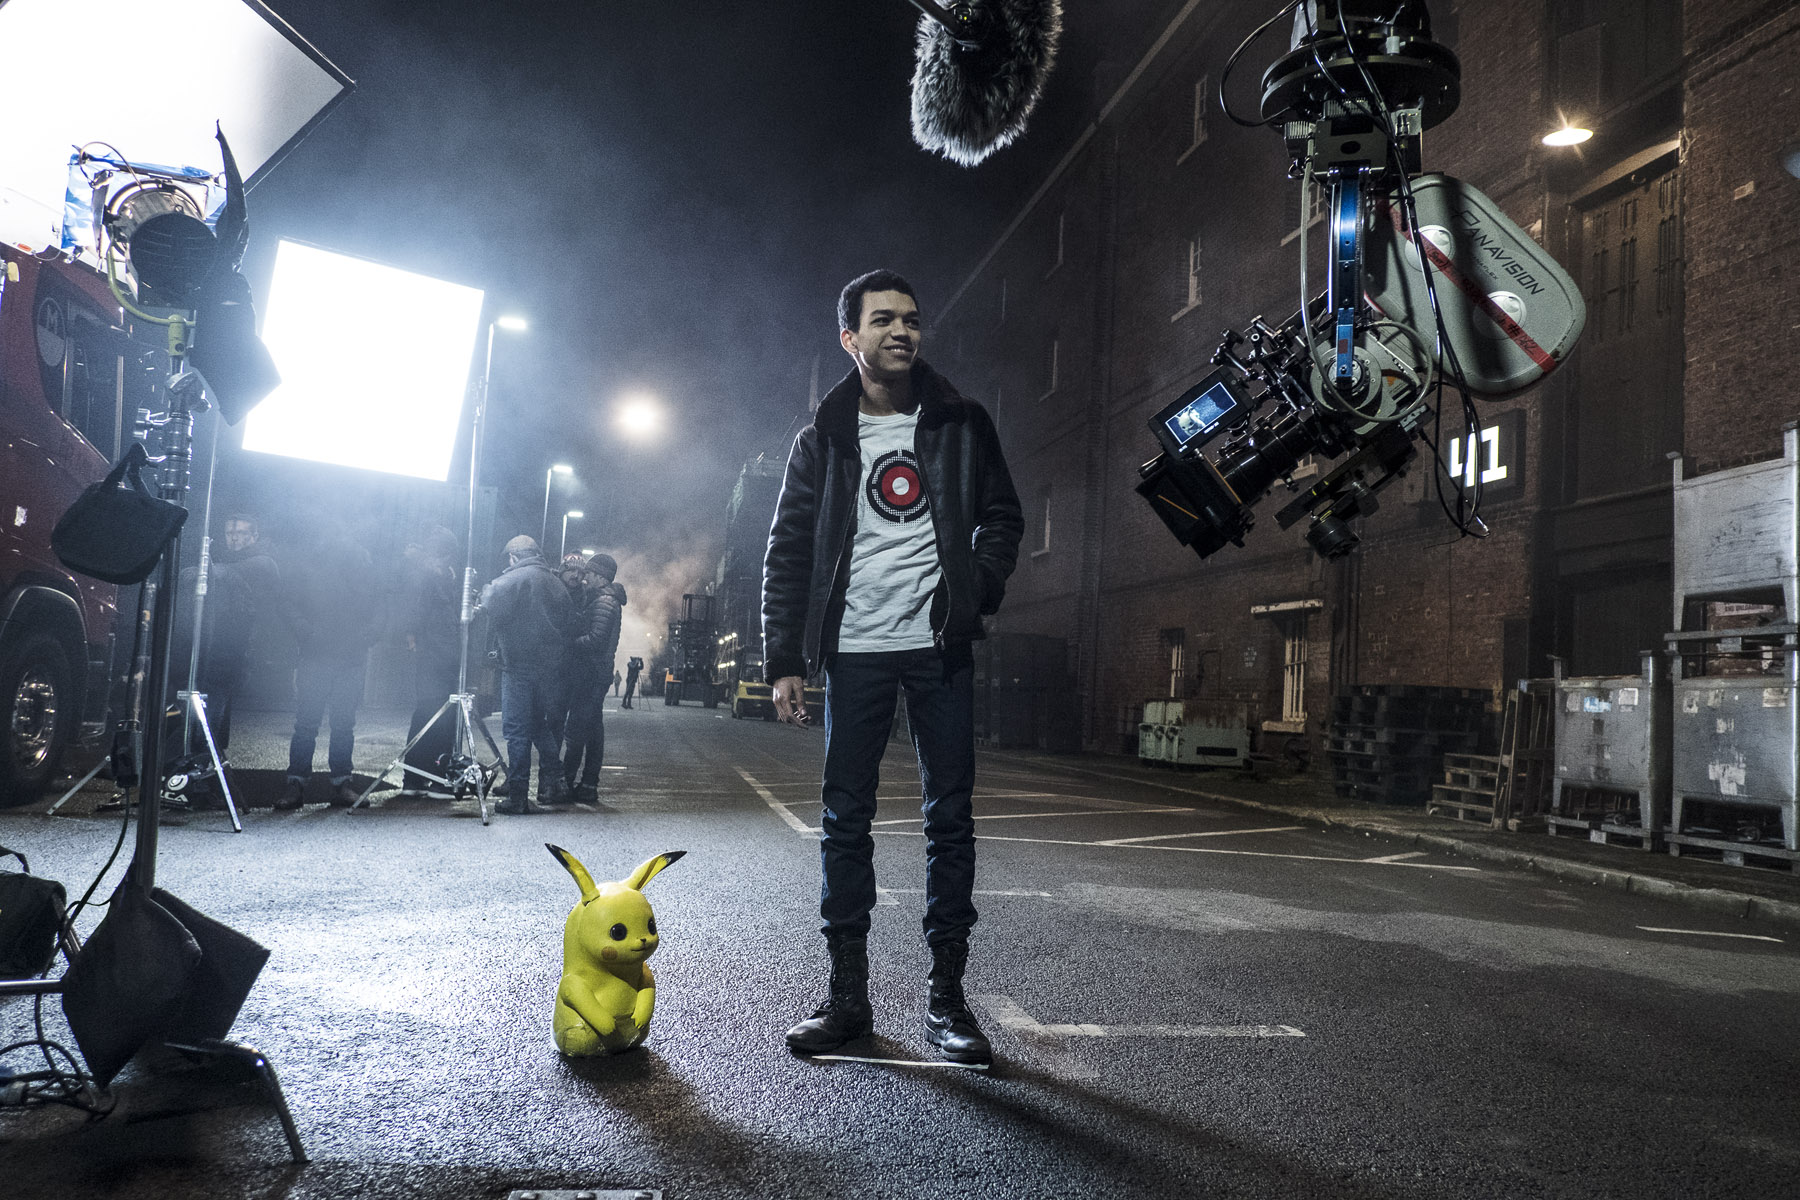 Justice Smith on the set of "Detective Pikachu." (Giles Keyte)